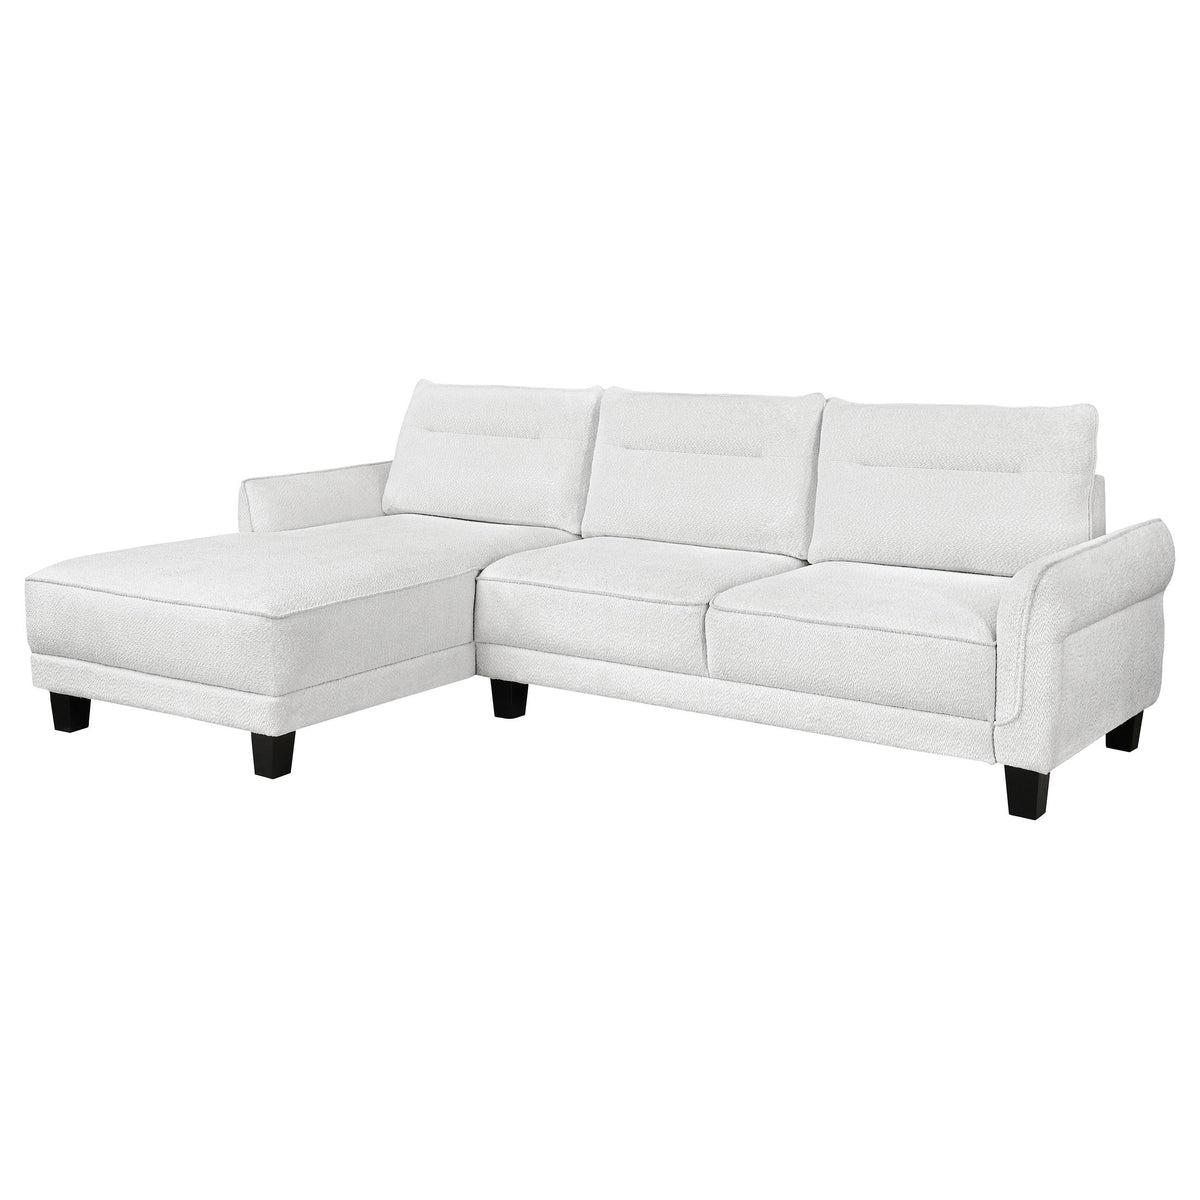 Caspian Upholstered Curved Arms Sectional Sofa  Half Price Furniture